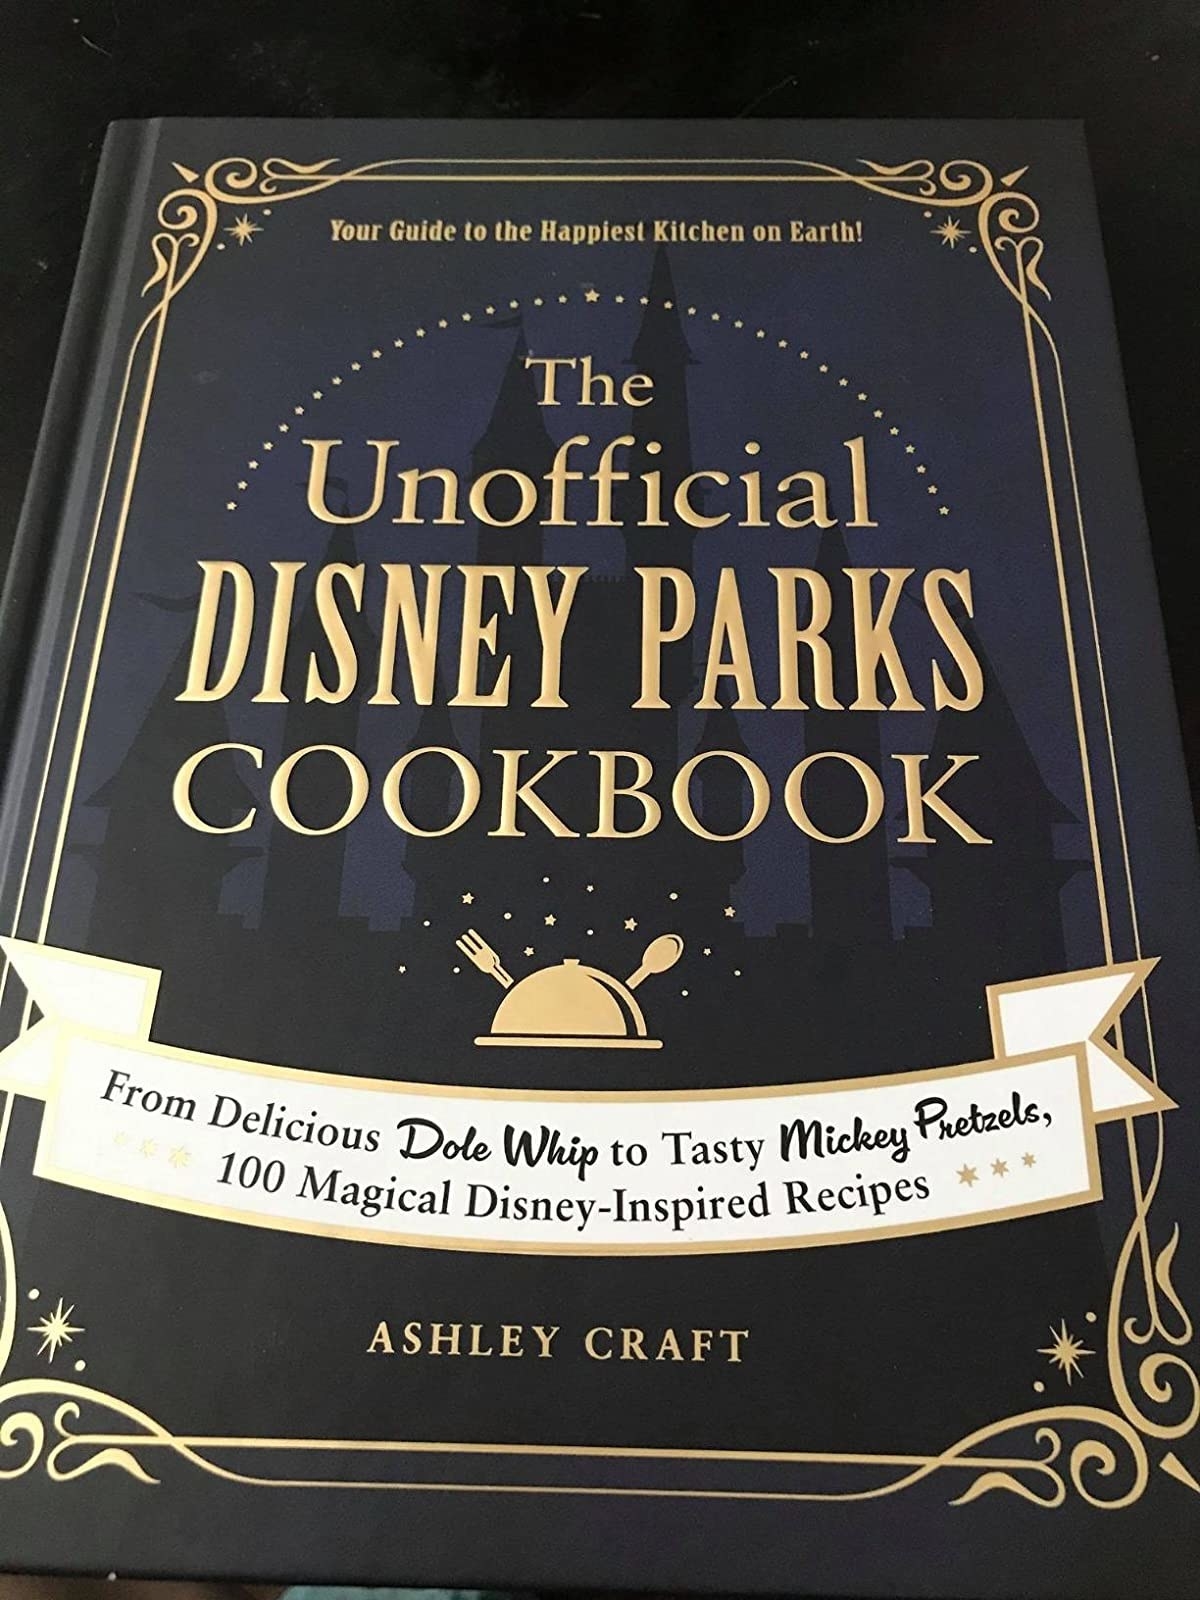 Reviewer image of cookbook cover